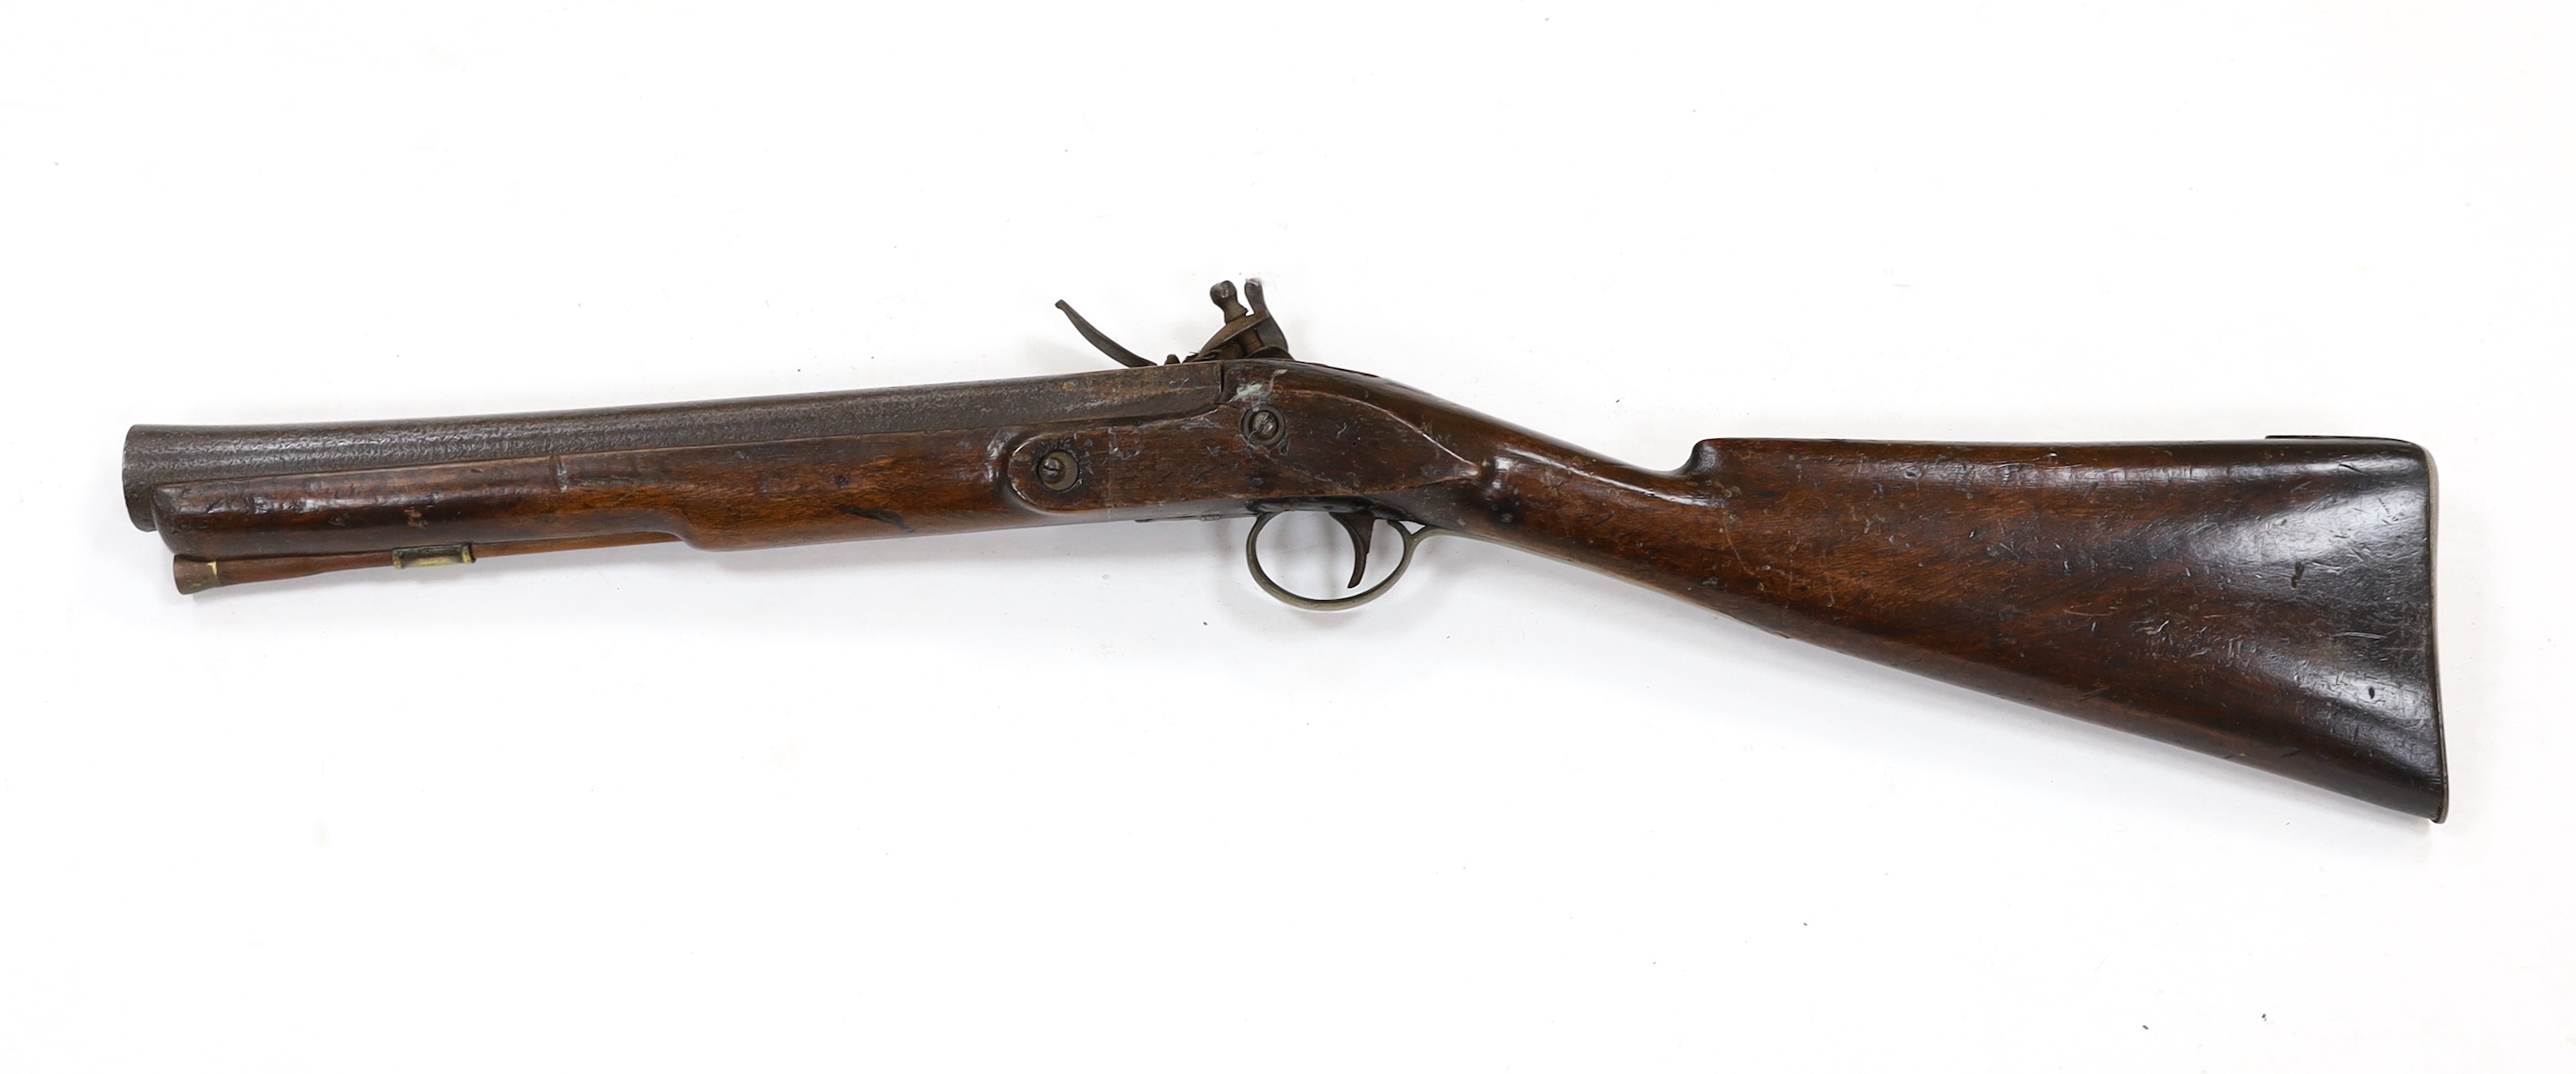 A flintlock blunderbuss fitted with a regulation British military service lock, stamped with tower and crown, GR civilian brass mounts, full stocked with wooden ramrod, barrel 36.5cm